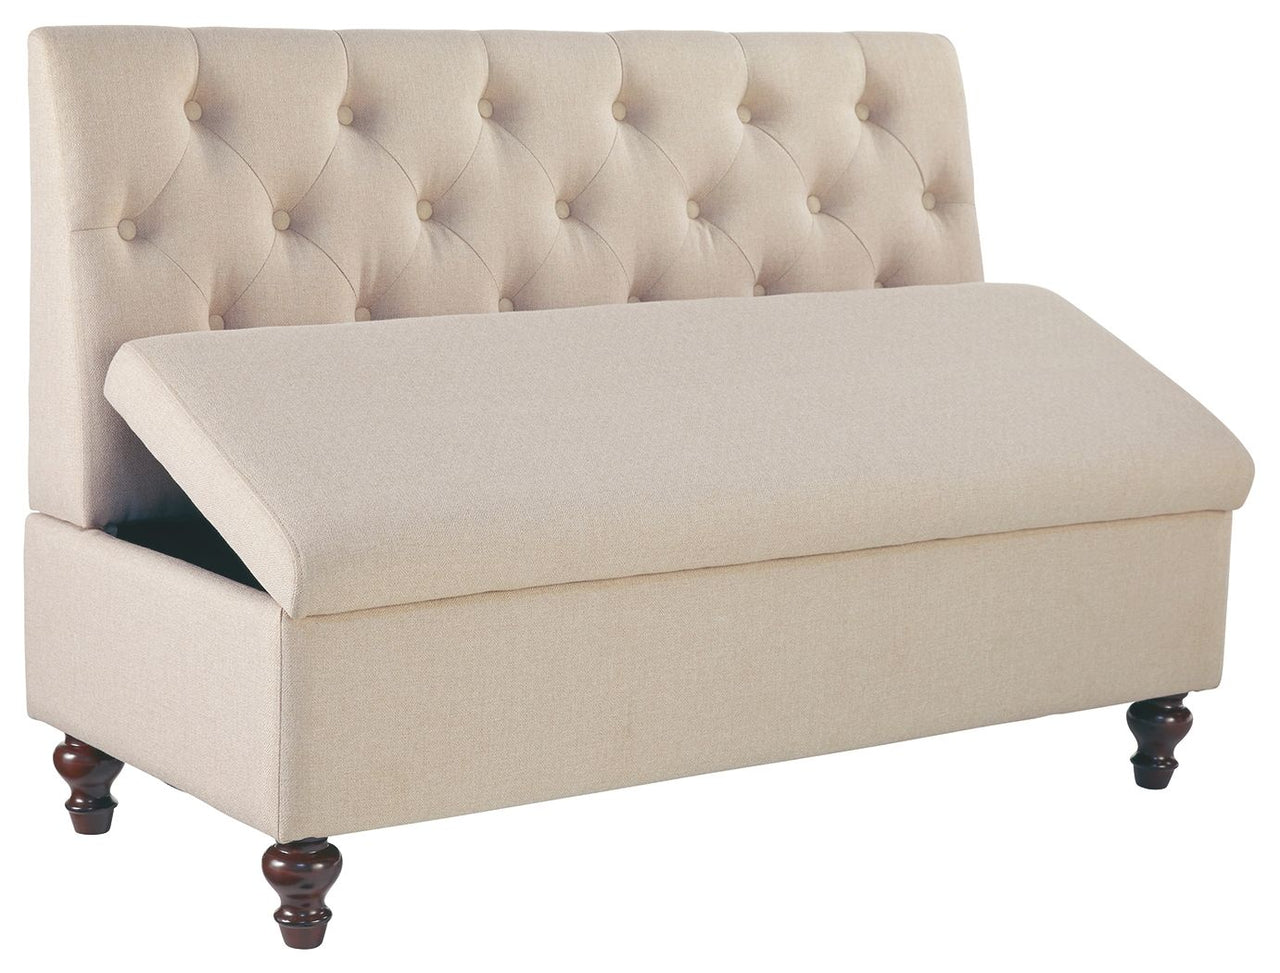 Gwendale - Light Beige - Storage Bench - Tony's Home Furnishings